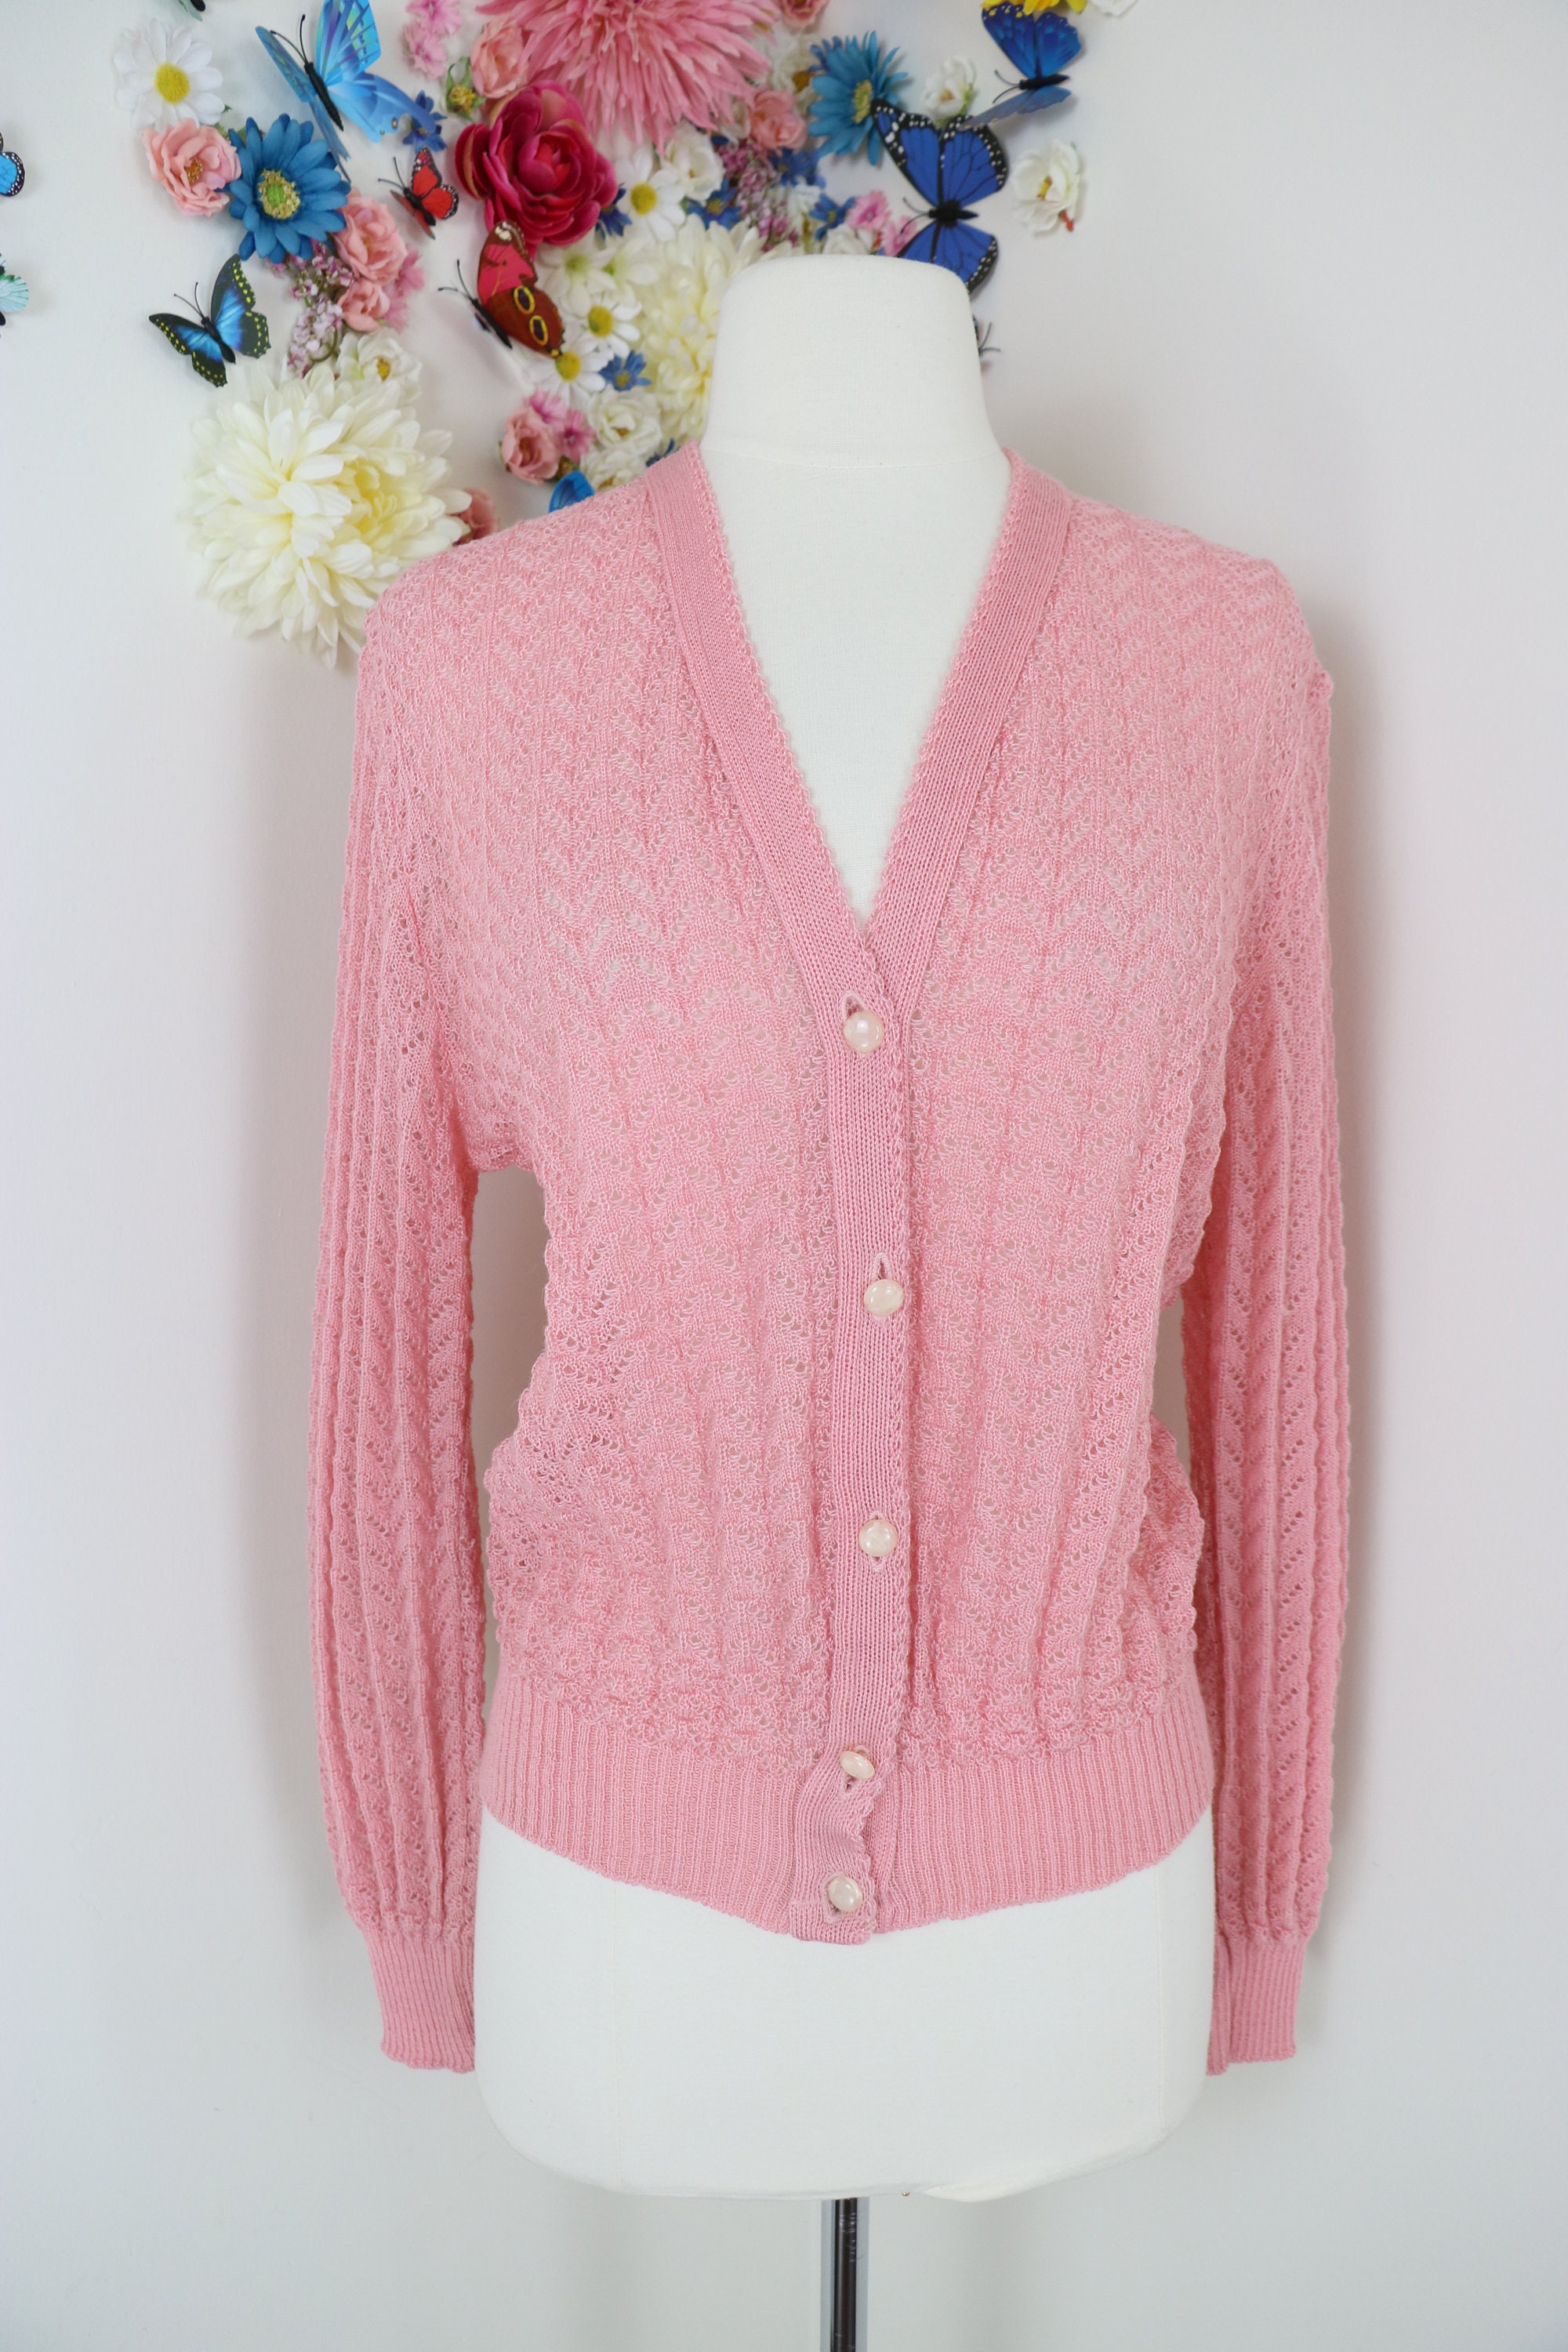 Pastel Pink Cardigan Sweater Vintage 1960s Crocheted Acrylic | Etsy